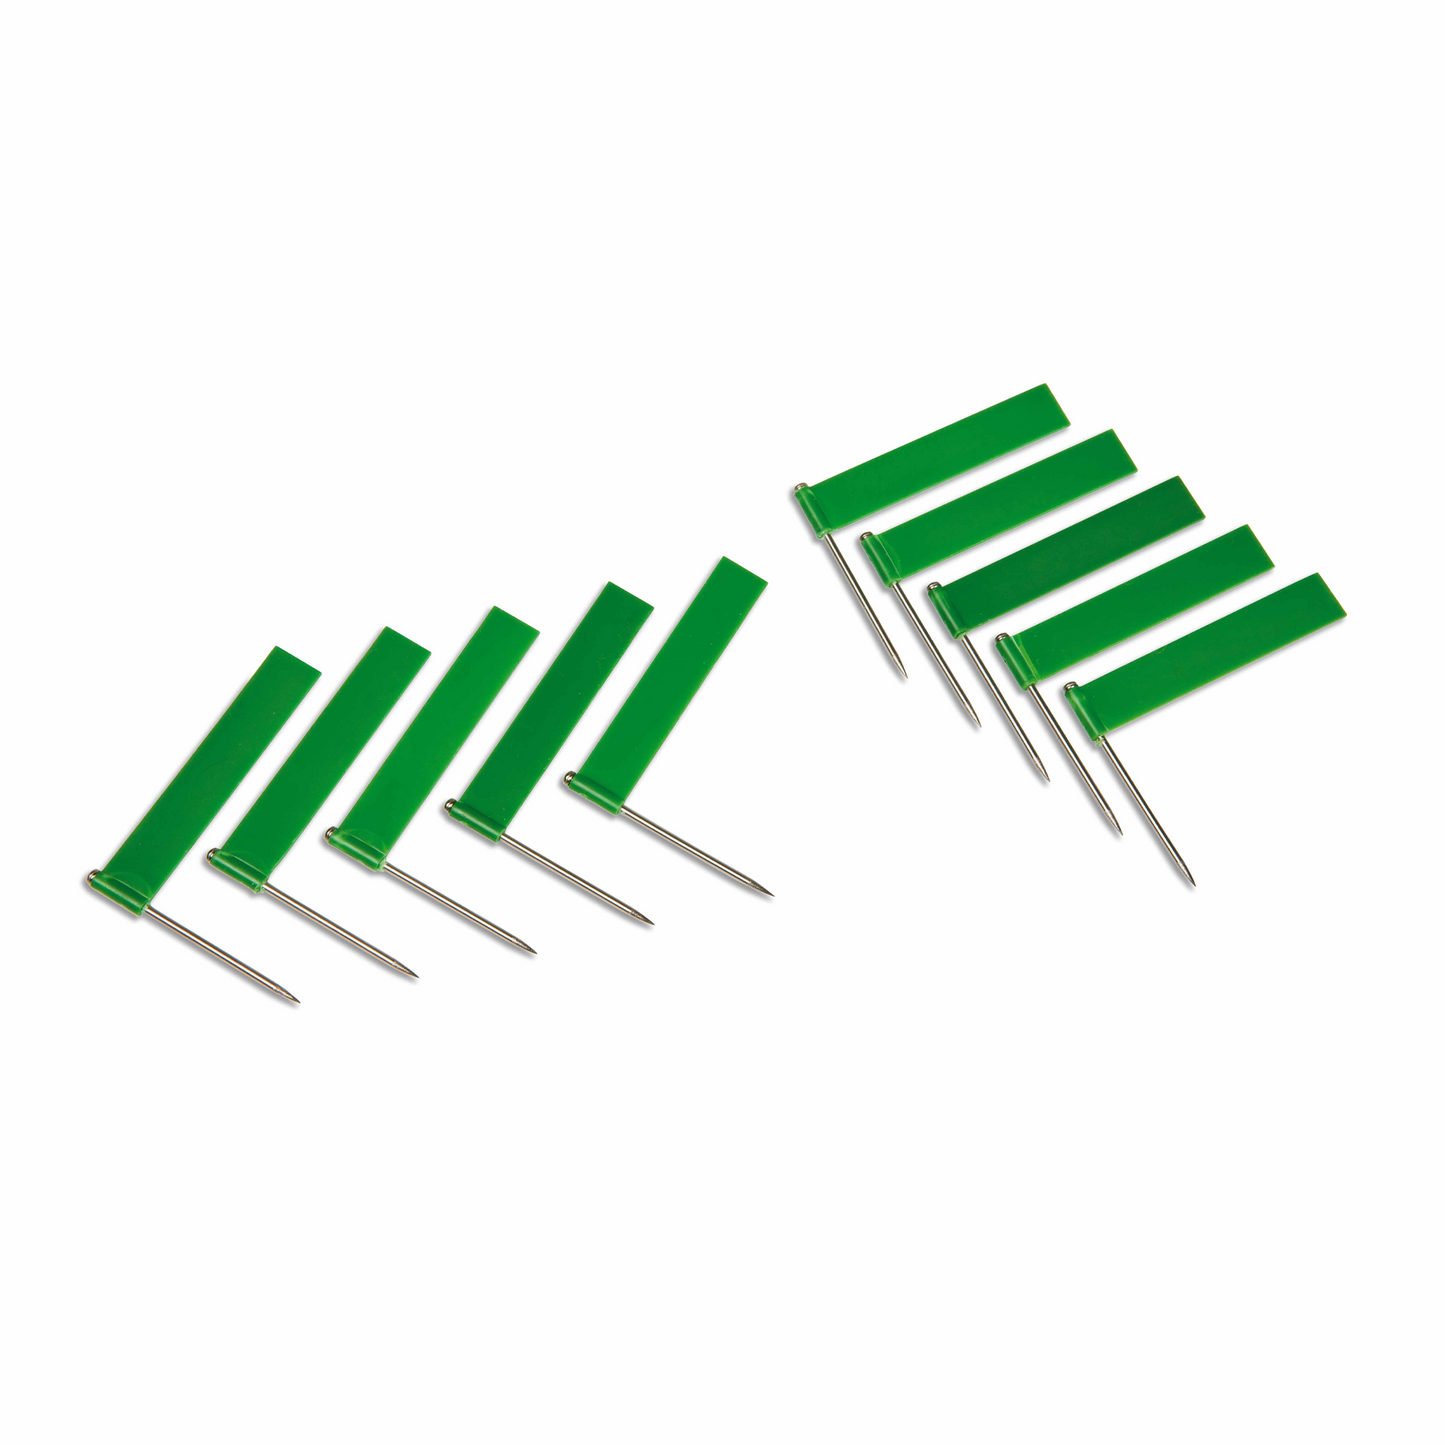 Additional flags: Green (10) - Nienhuis AMI